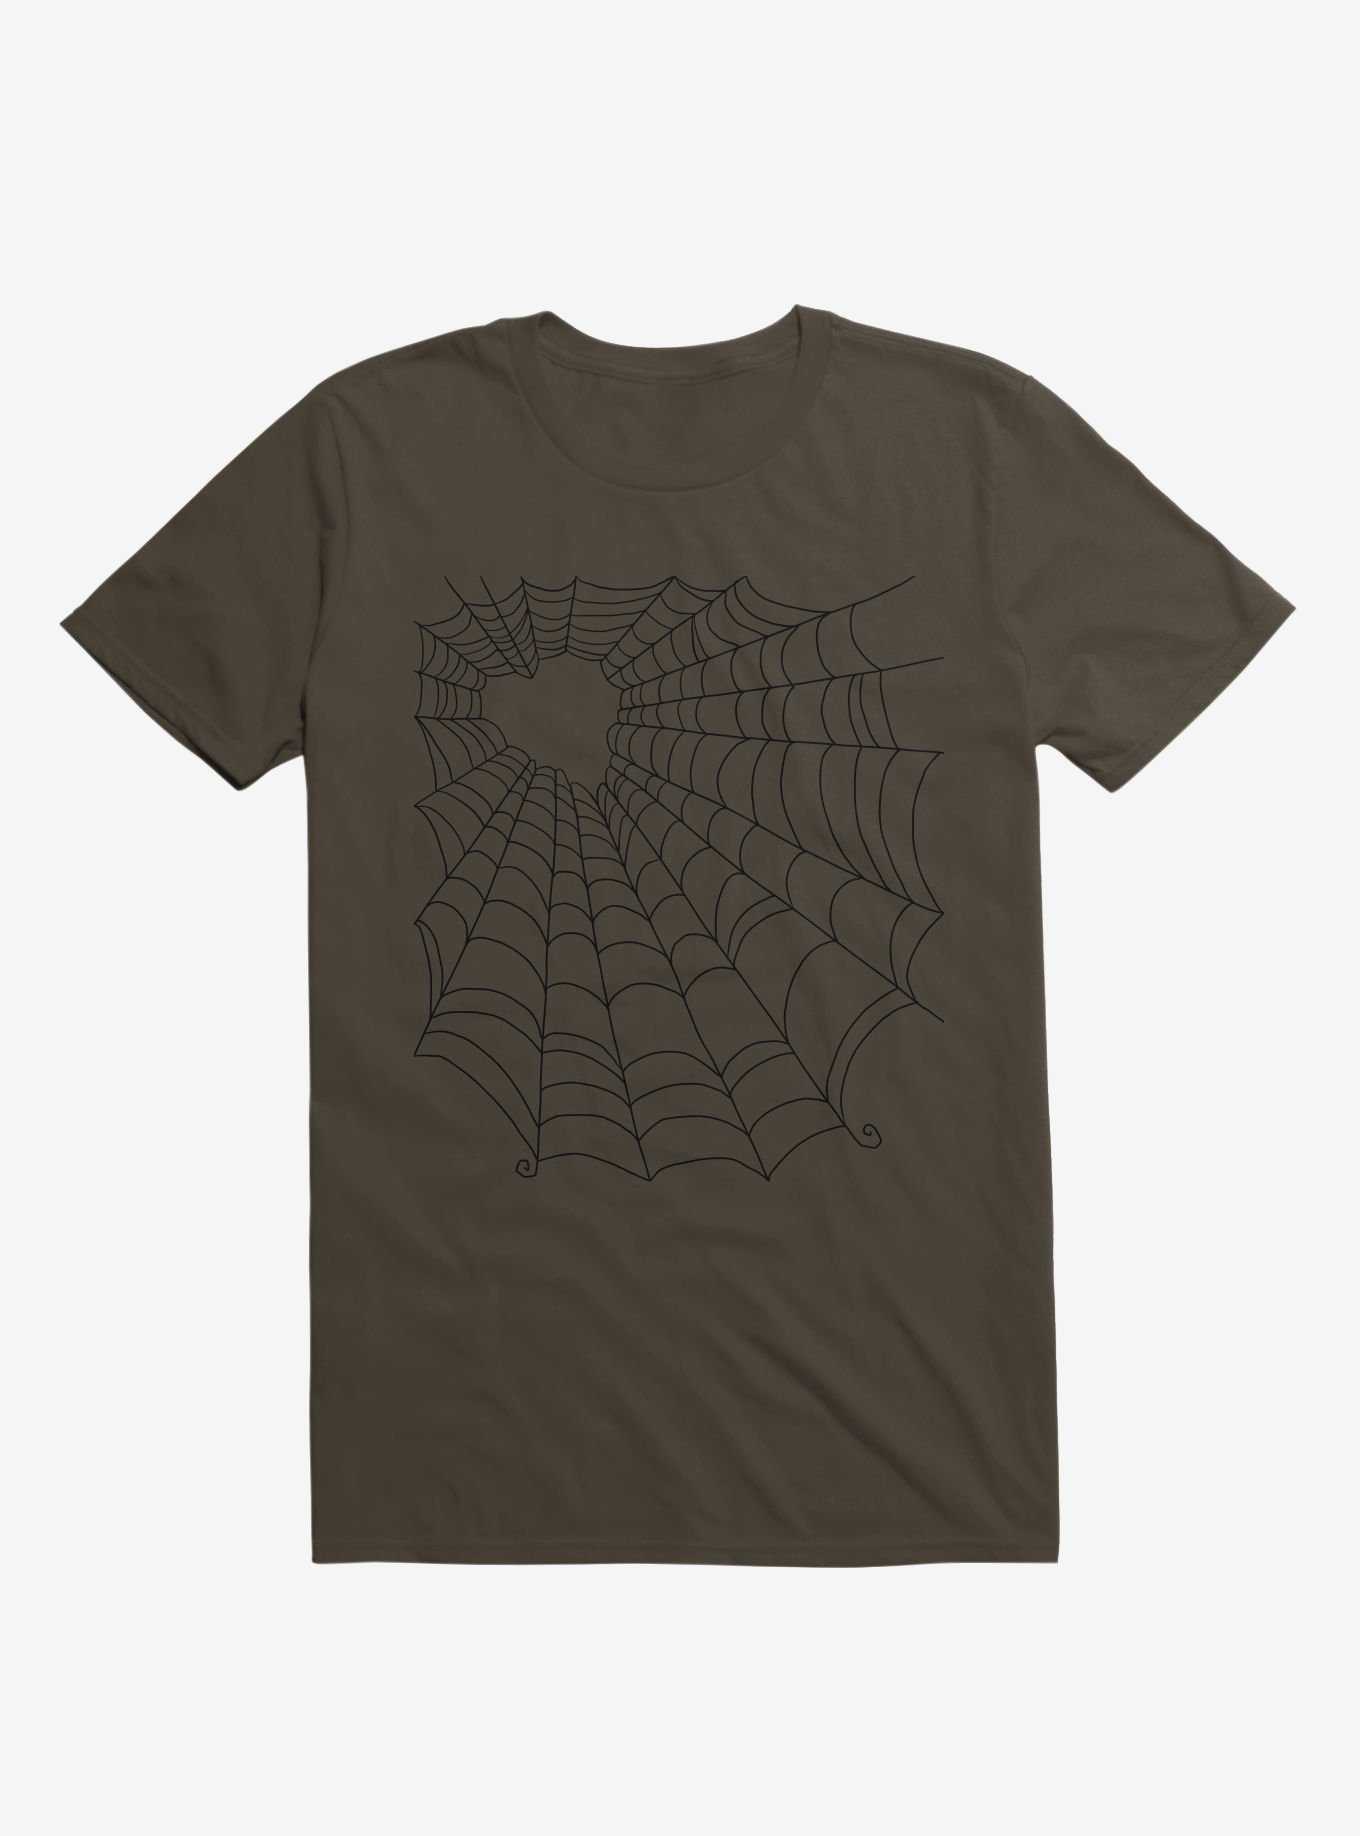 Caught You In My Black Hearted Web Brown T-Shirt, , hi-res